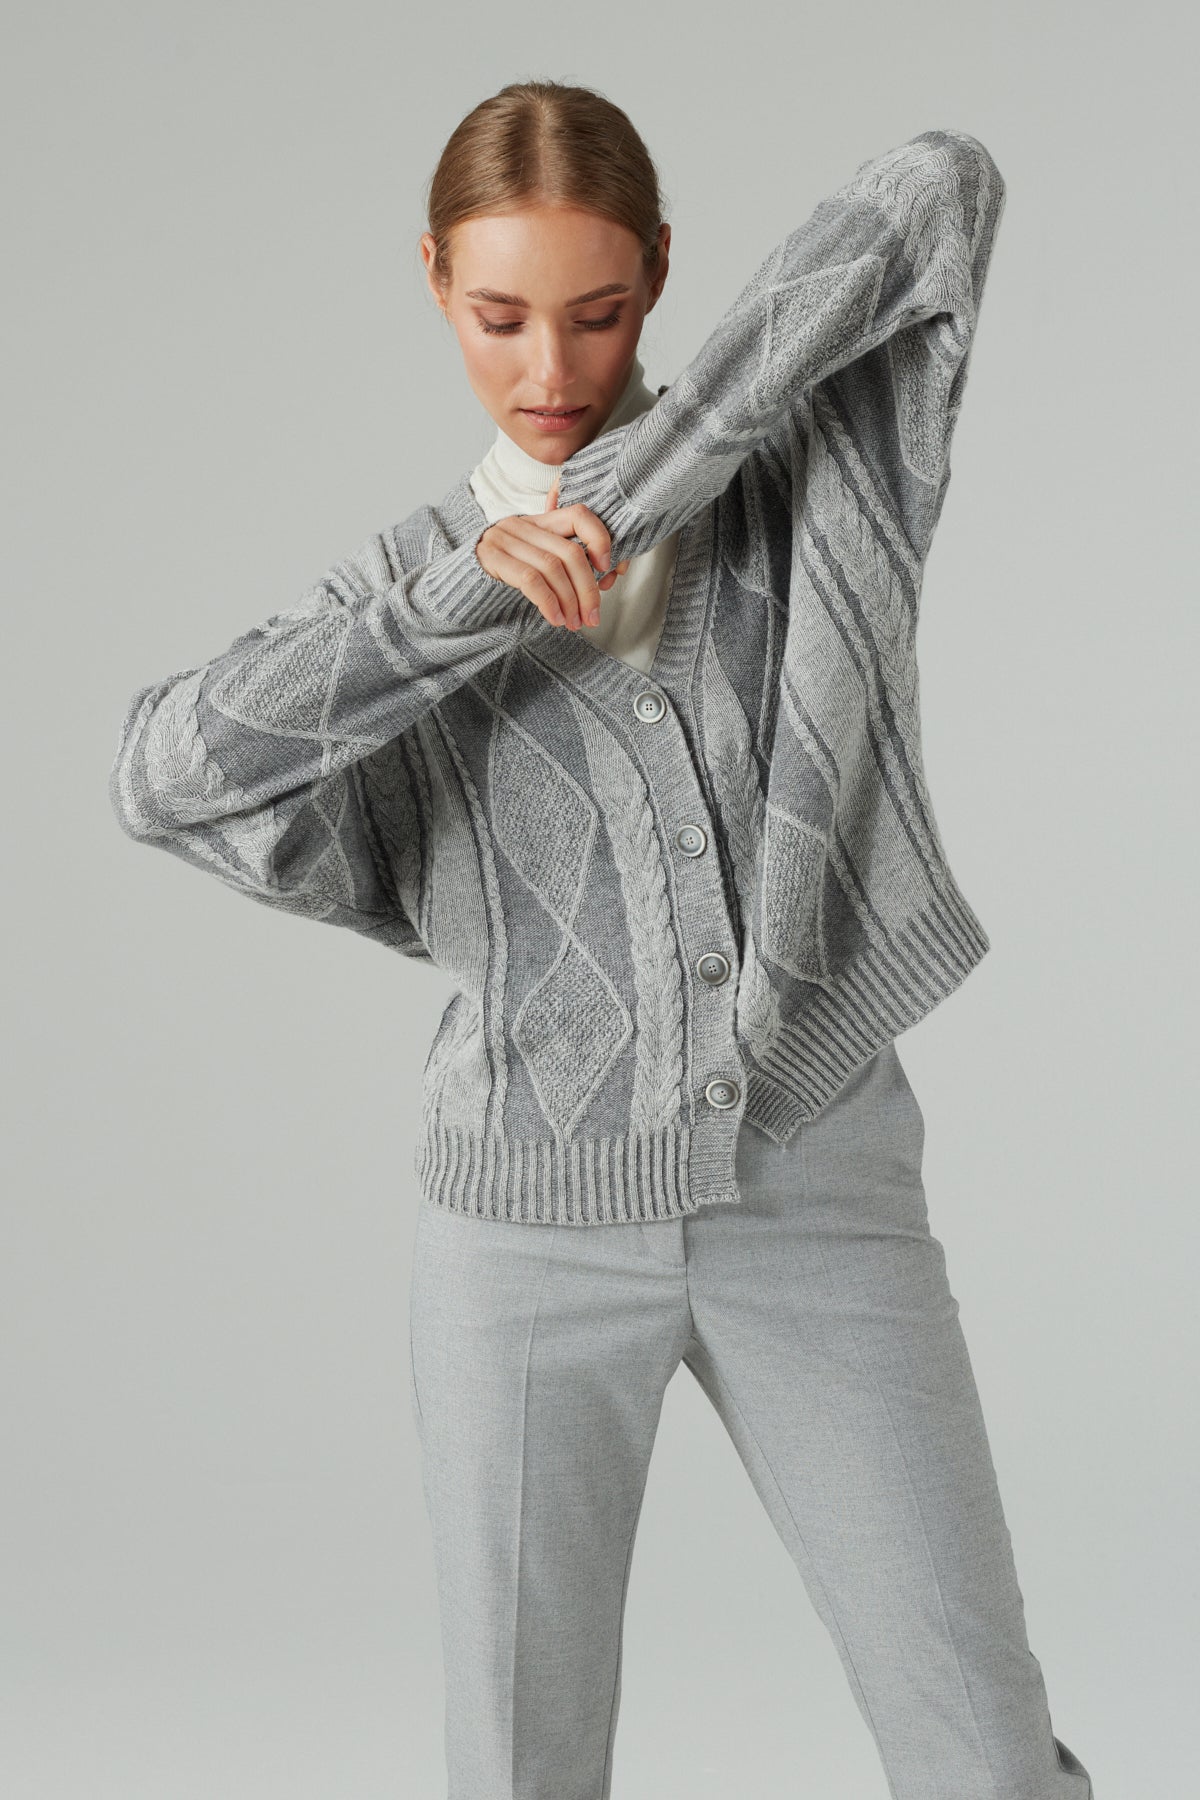 TEXTURED V-NECK CARDIGAN WITH CASHMERE GREY